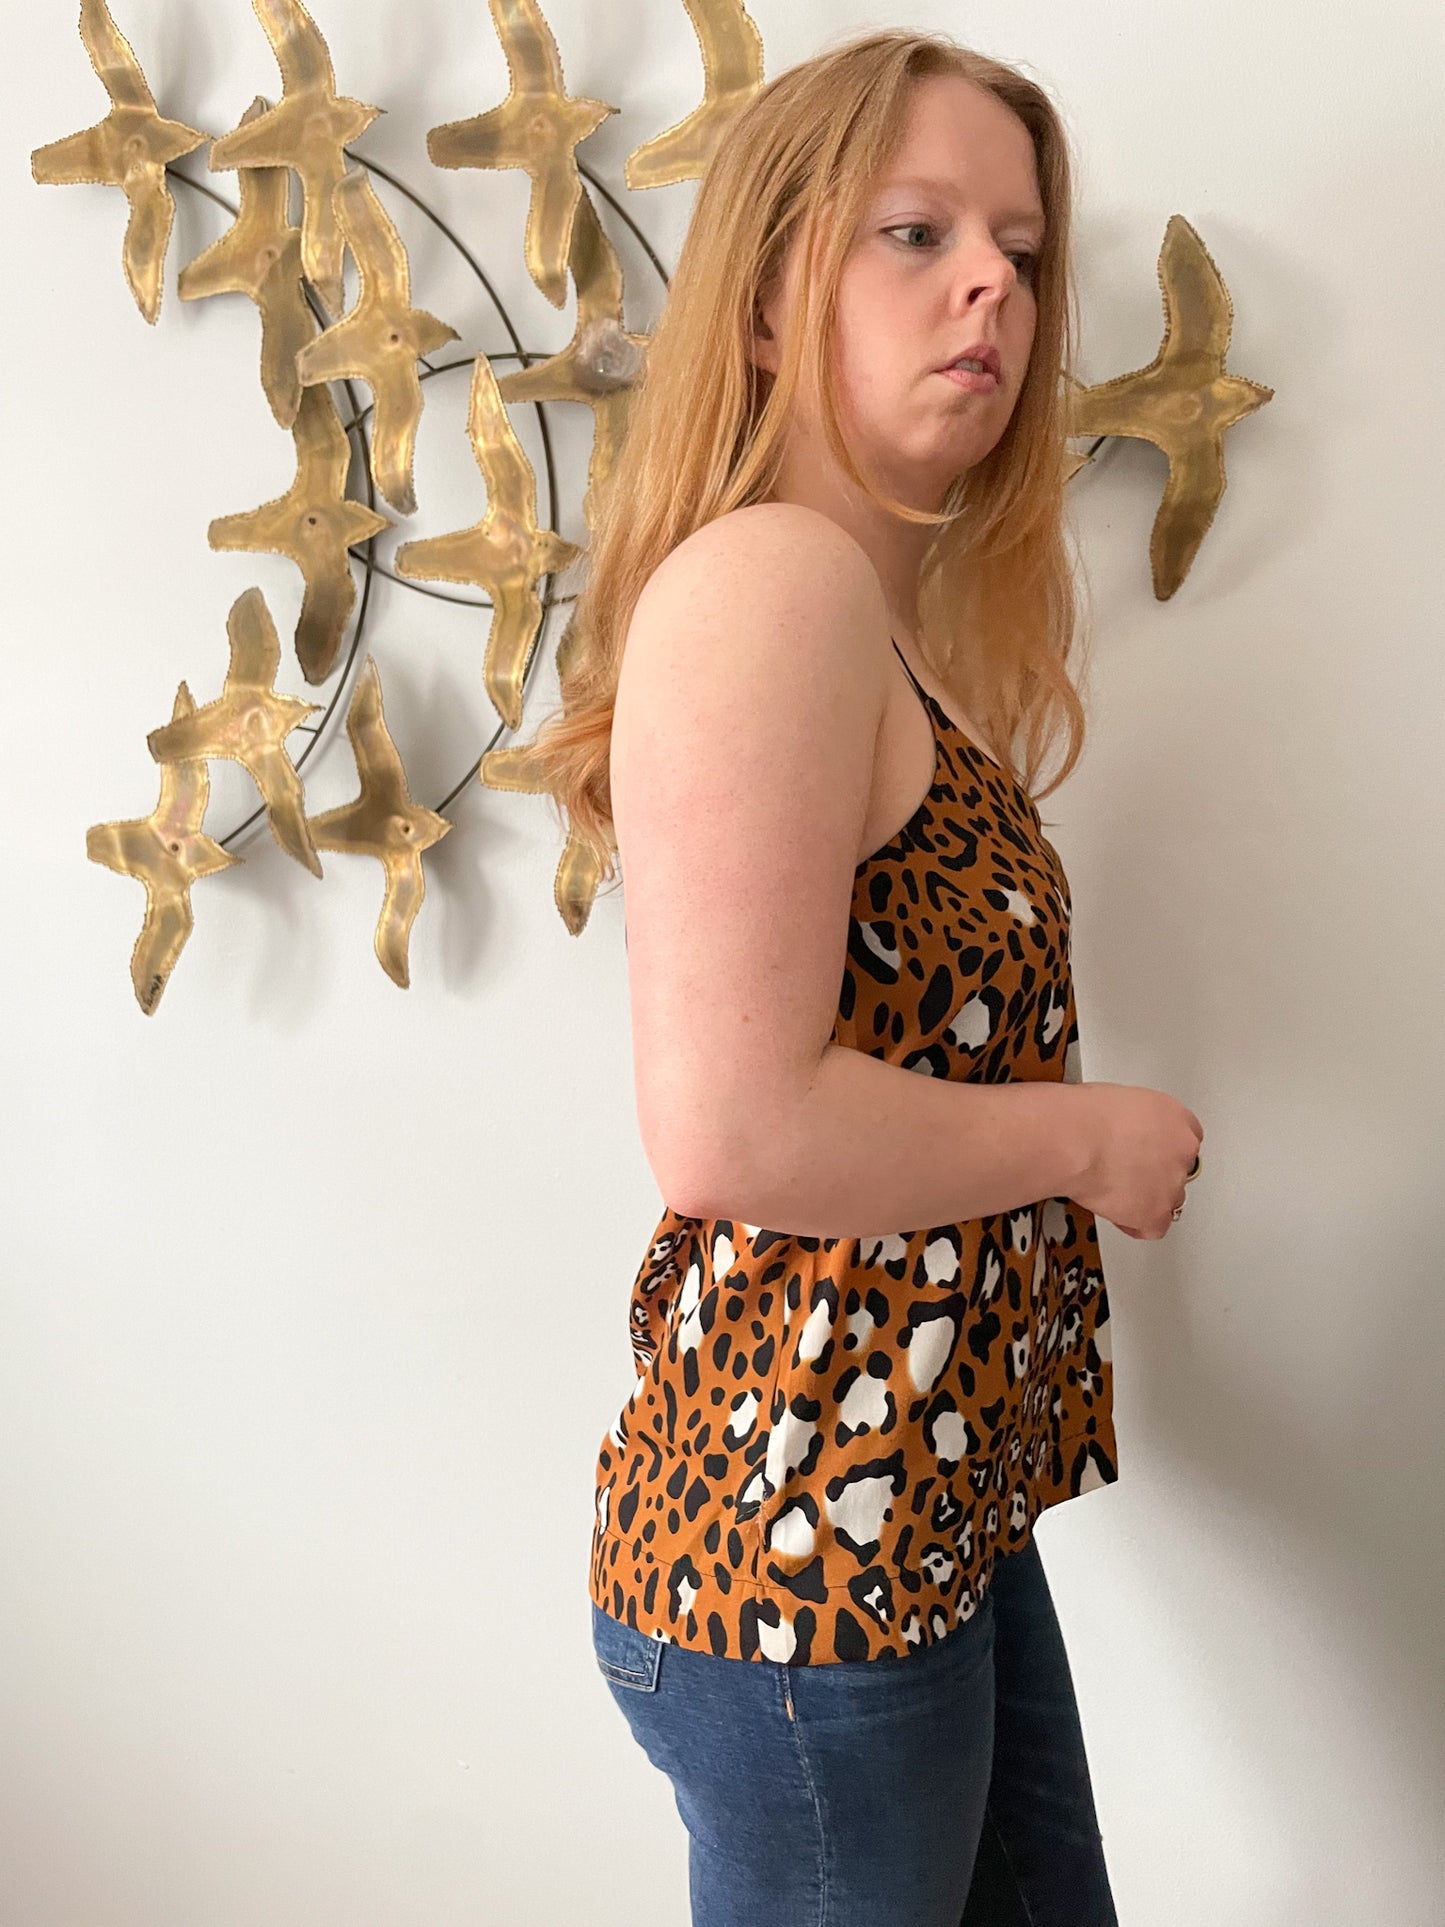 Topshop Tall Leopard Sleeveless Top - Size 4 (S)